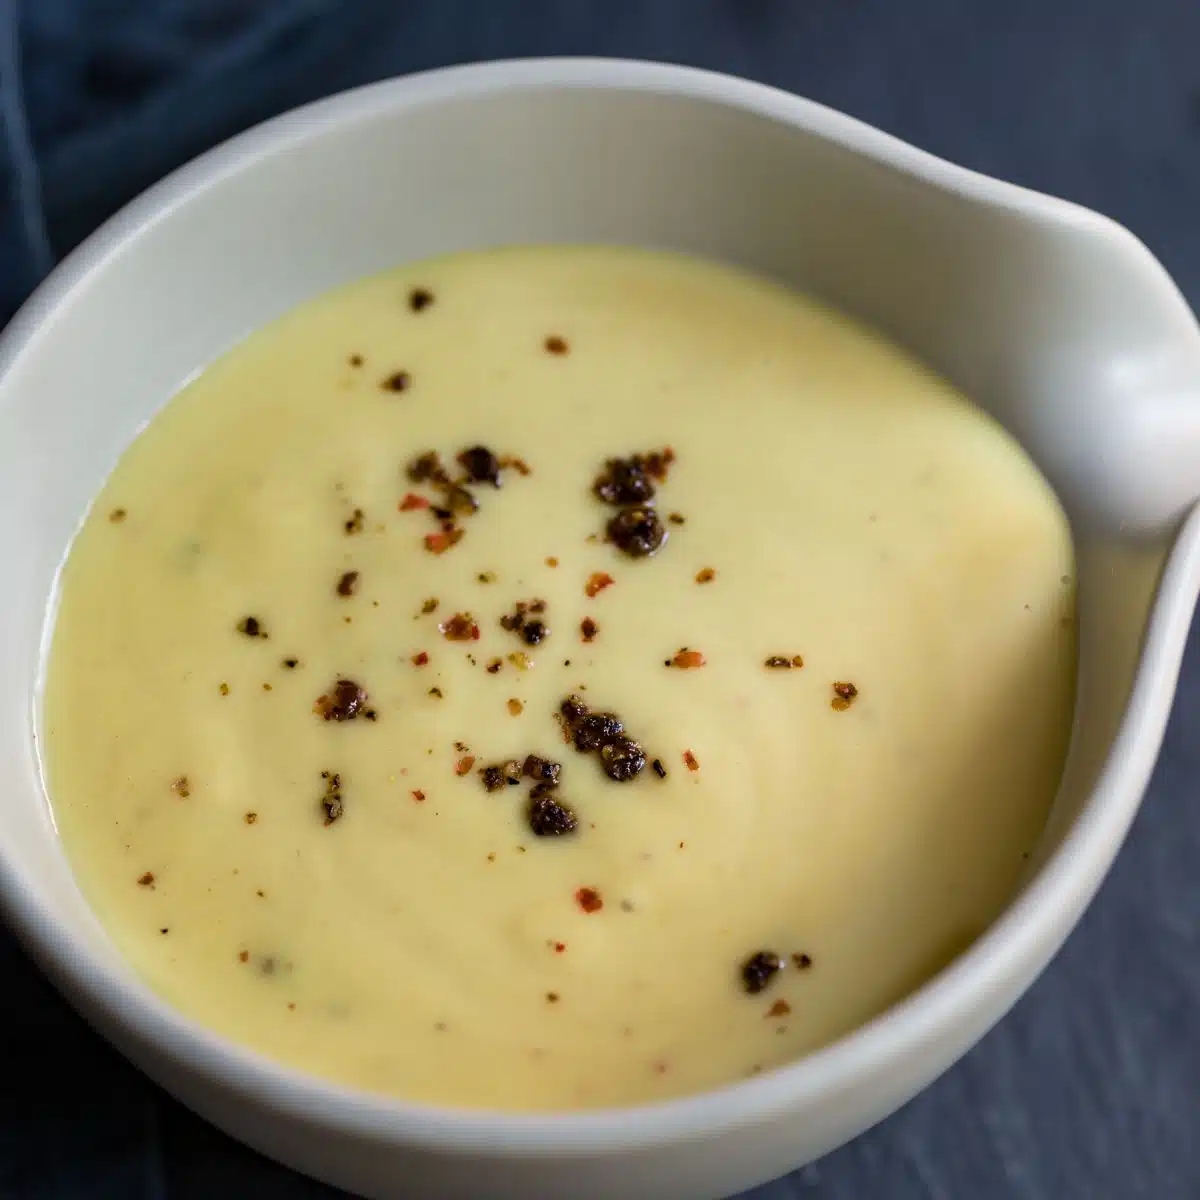 Square image of honey mustard sauce in a white bowl.